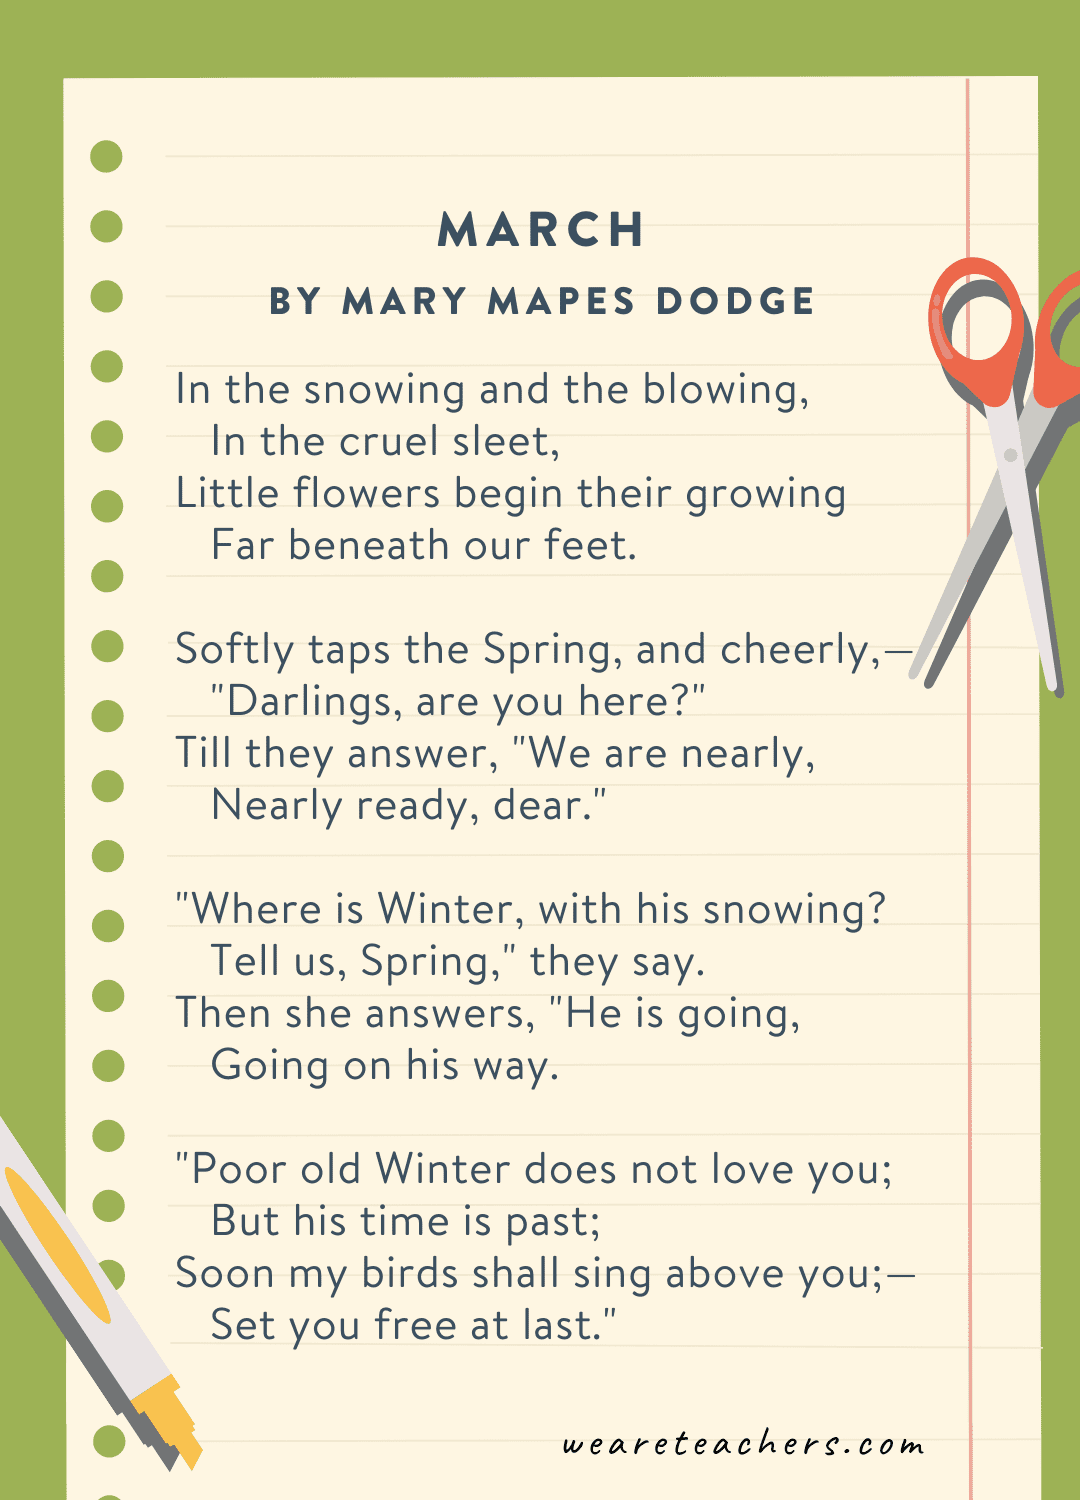 Example of 3rd grade poems: March by Mary Mapes Dodge